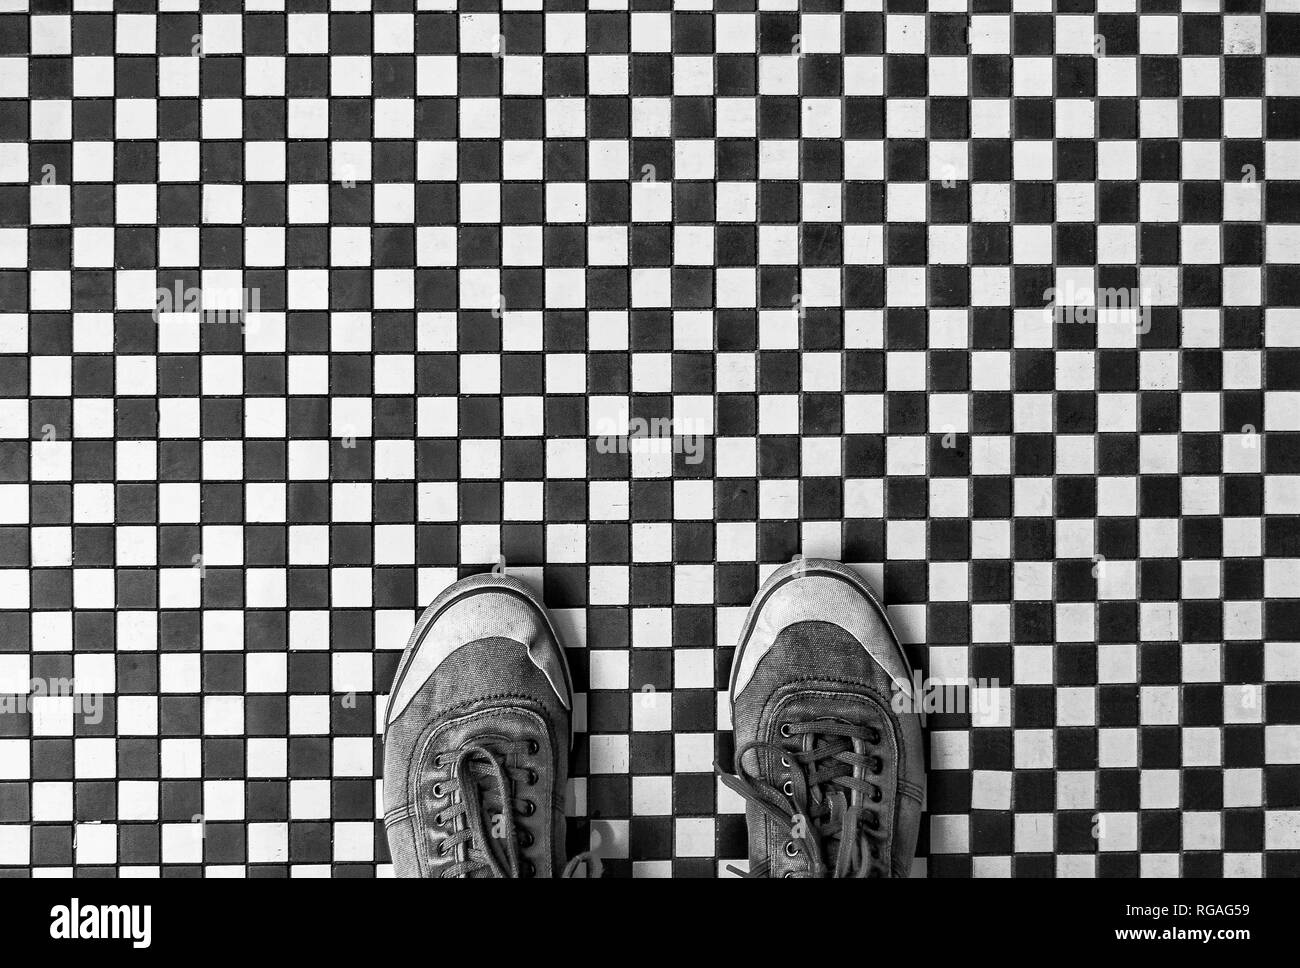 Looking down from above onto a pair of worn sneakers or shoes standing on a black and white checkered mosaic tiled floor with copy space Stock Photo